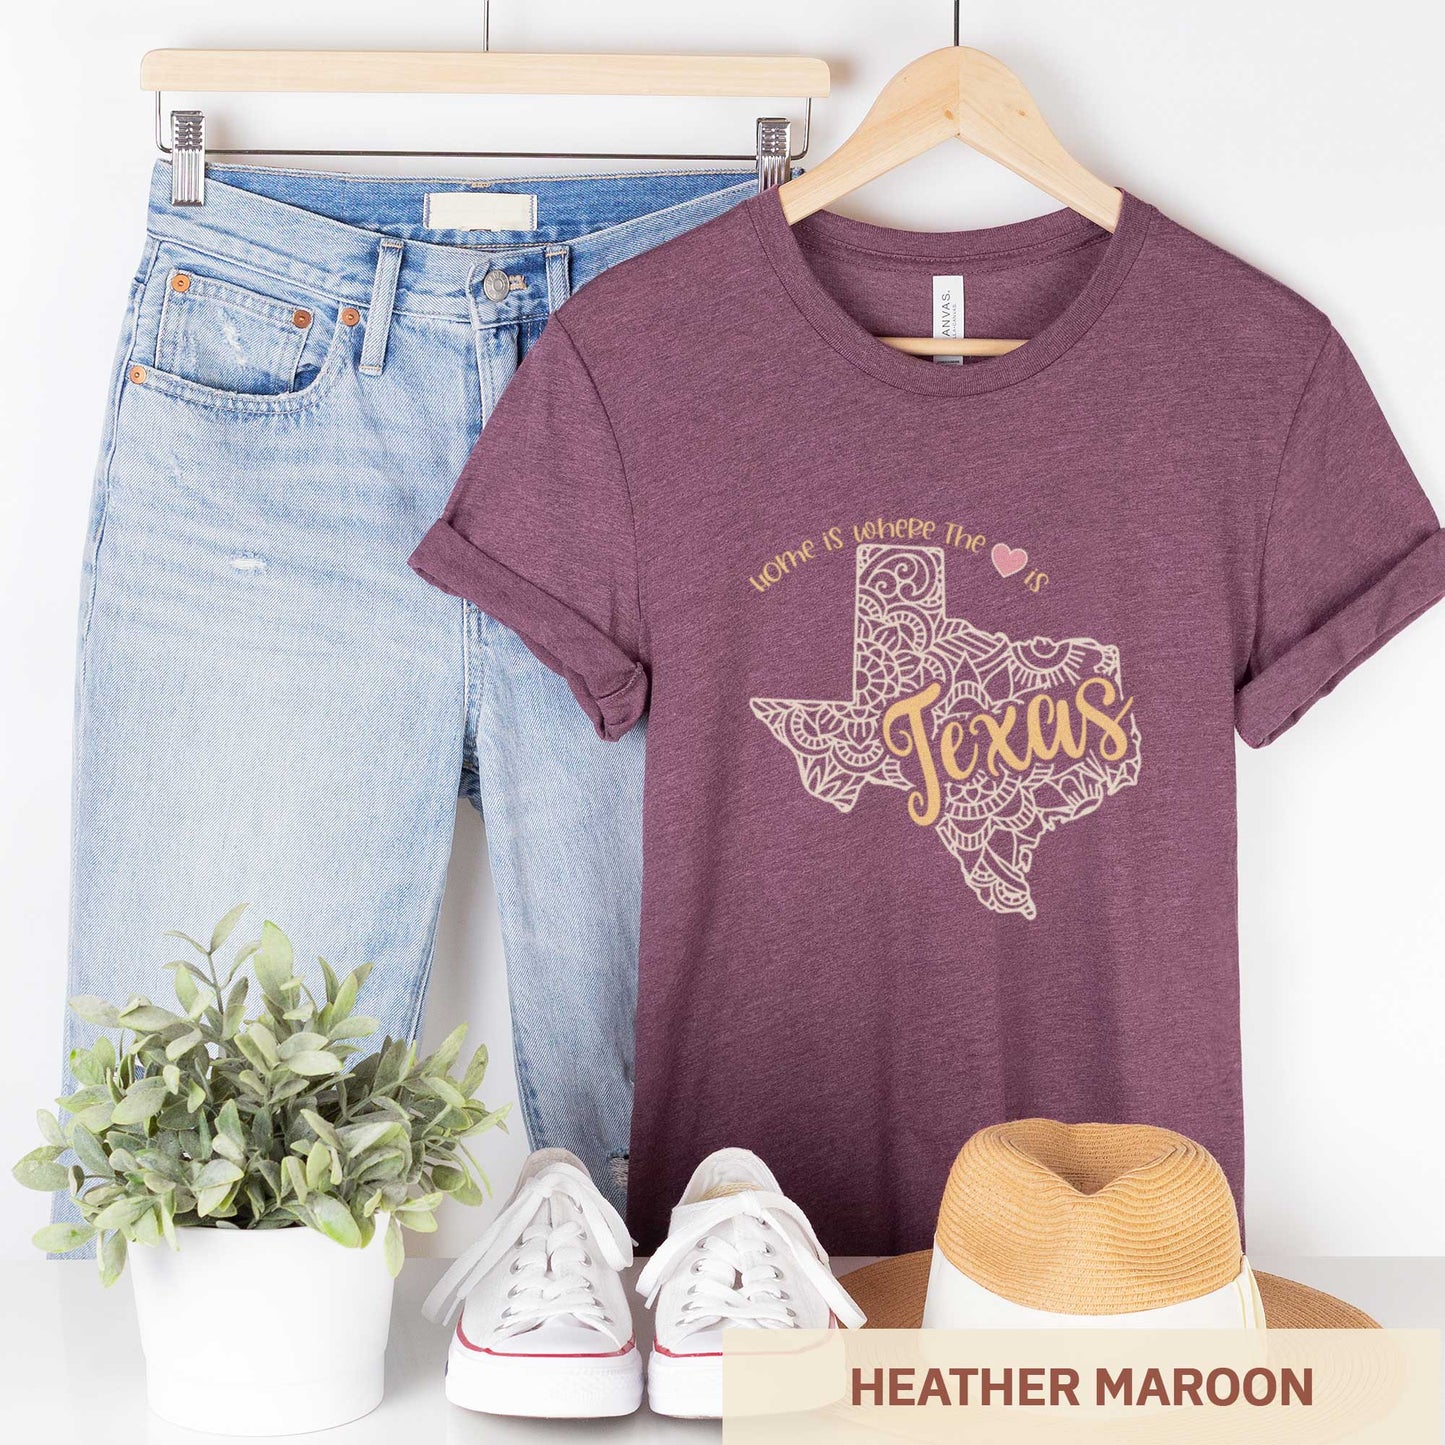 A hanging heather maroon Bella Canvas t-shirt featuring a mandala in the shape of Texas with the words home is where the heart is.